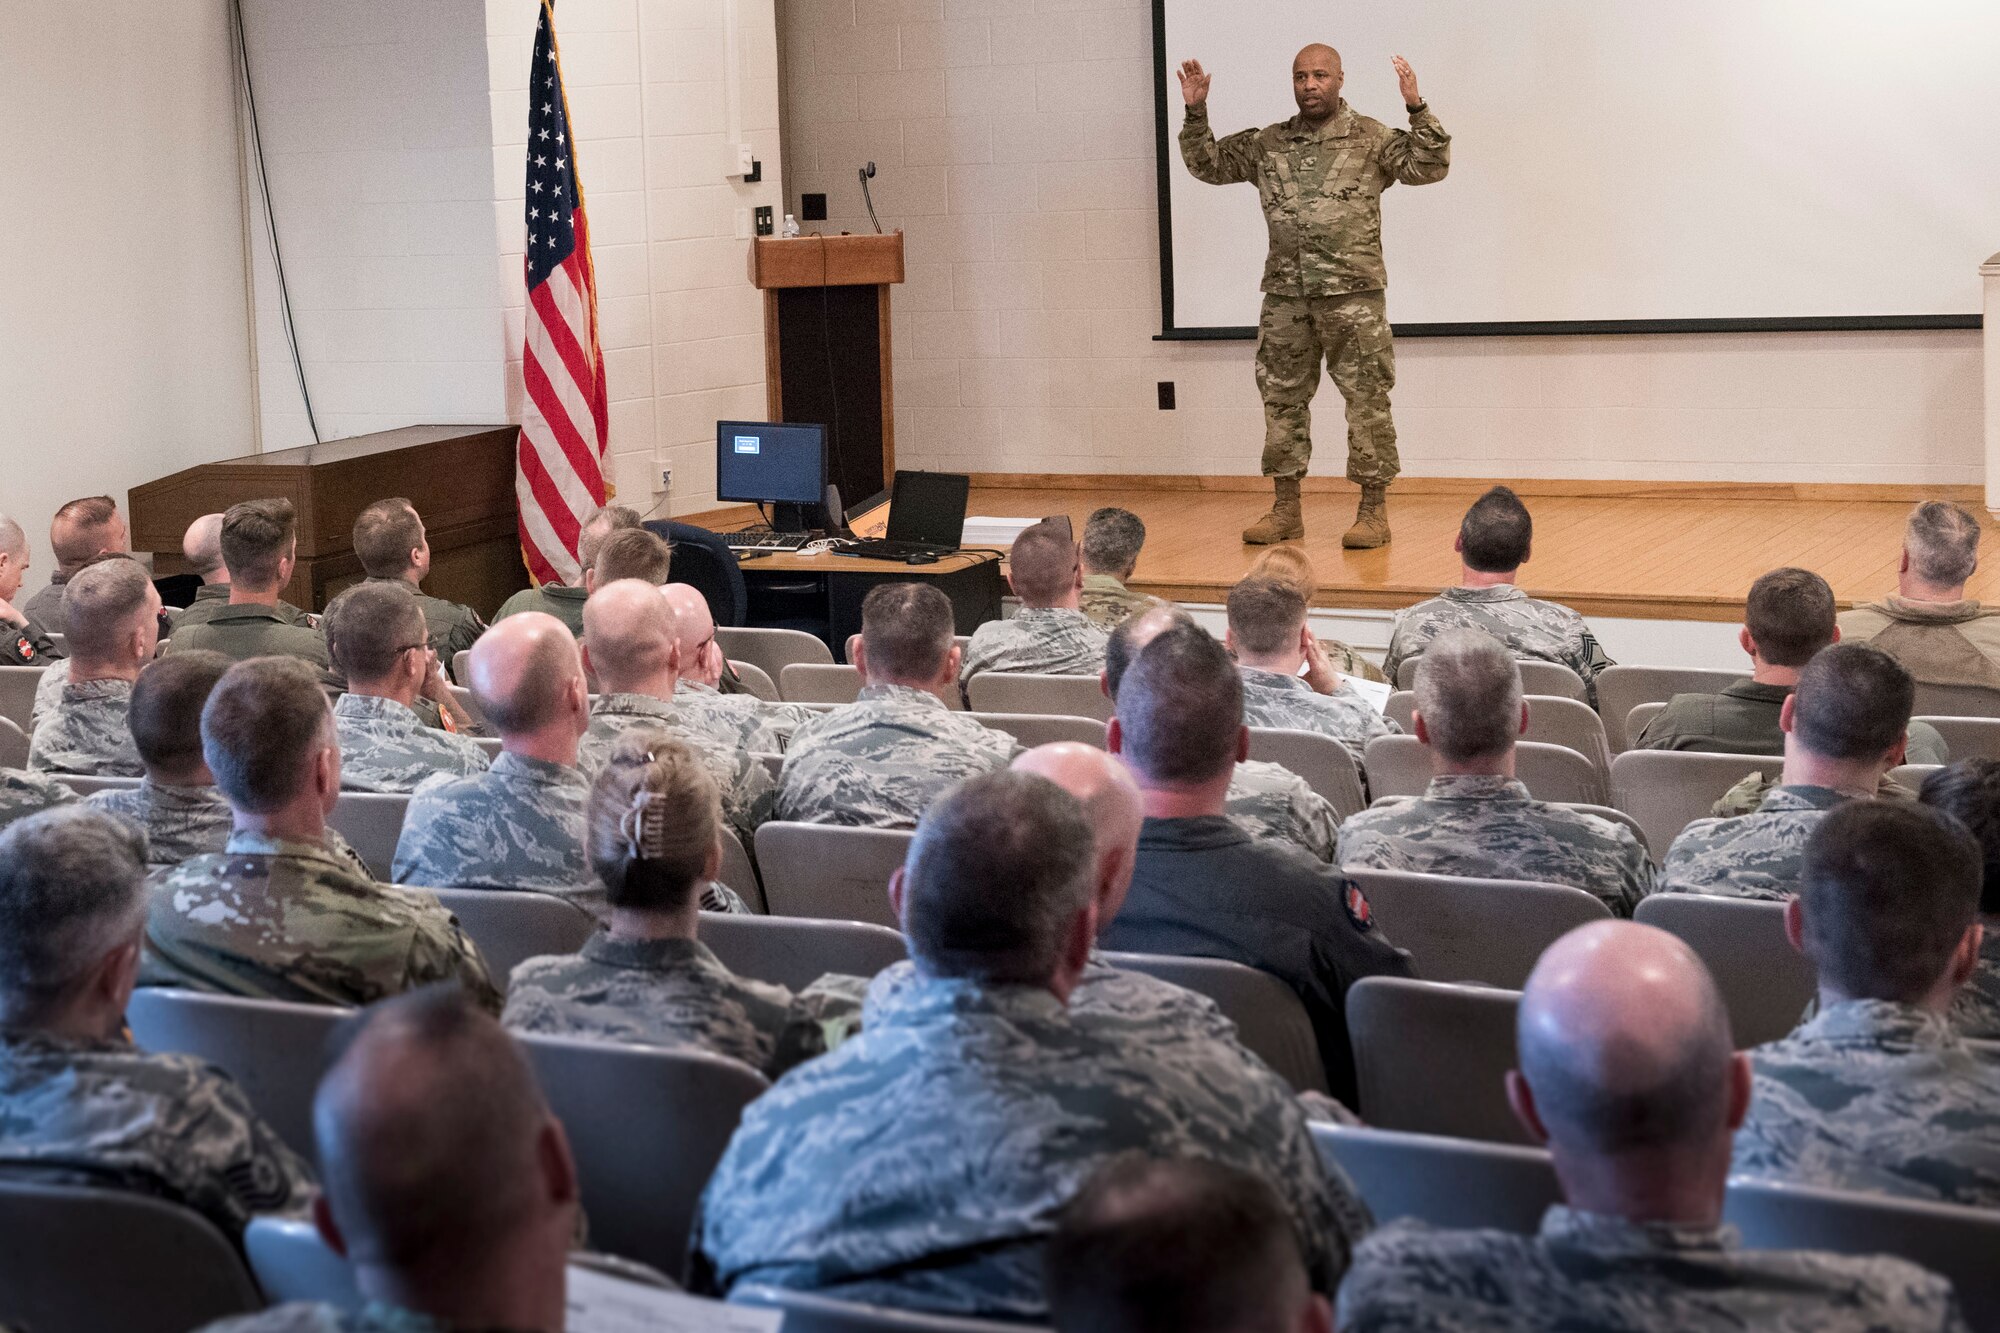 Brig. Gen. Christopher Walker, the West Virginia National Guard’s Assistant Adjutant General- Air, addresses officers and supervisors at the 167th Airlift Wing, April 7, 2019. Walker discussed his vision and expectations of the wing, as well as the wing’s role in support of the National Defense Strategy. (U.S. Air National Guard photo by Tech. Sgt. Jodie Witmer)